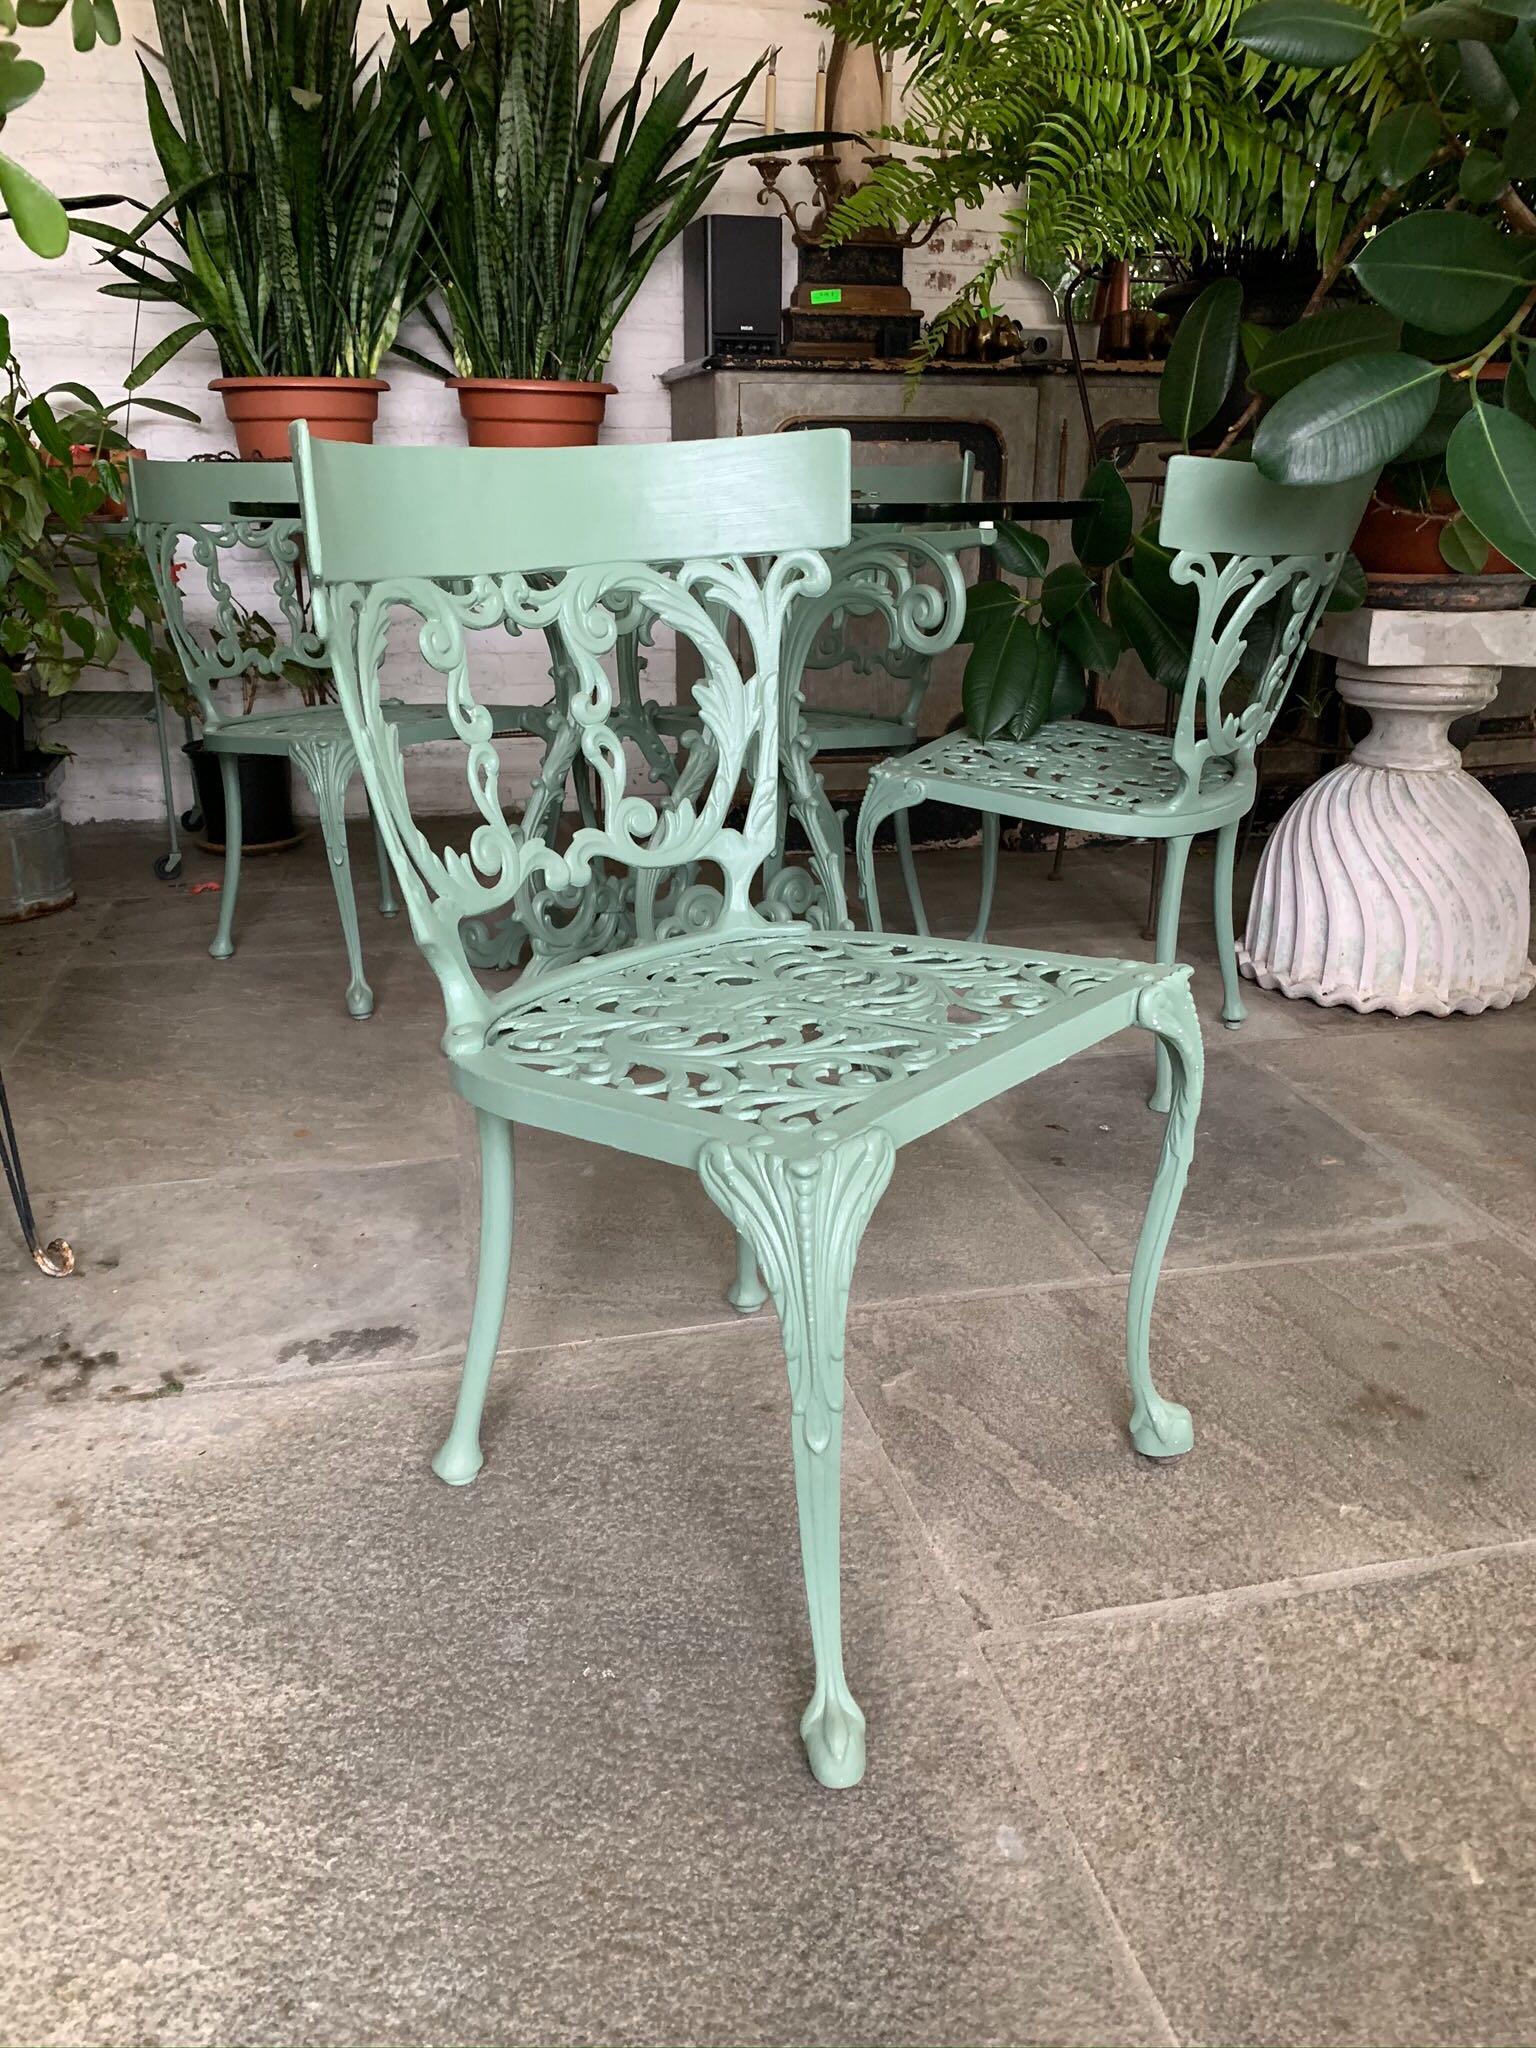 Cast iron outdoor garden or patio furniture with green painted finish. The set is composed of five pieces comprising one glass top table and four chairs in Neoclassical Revival style. In great vintage condition with age-appropriate wear and